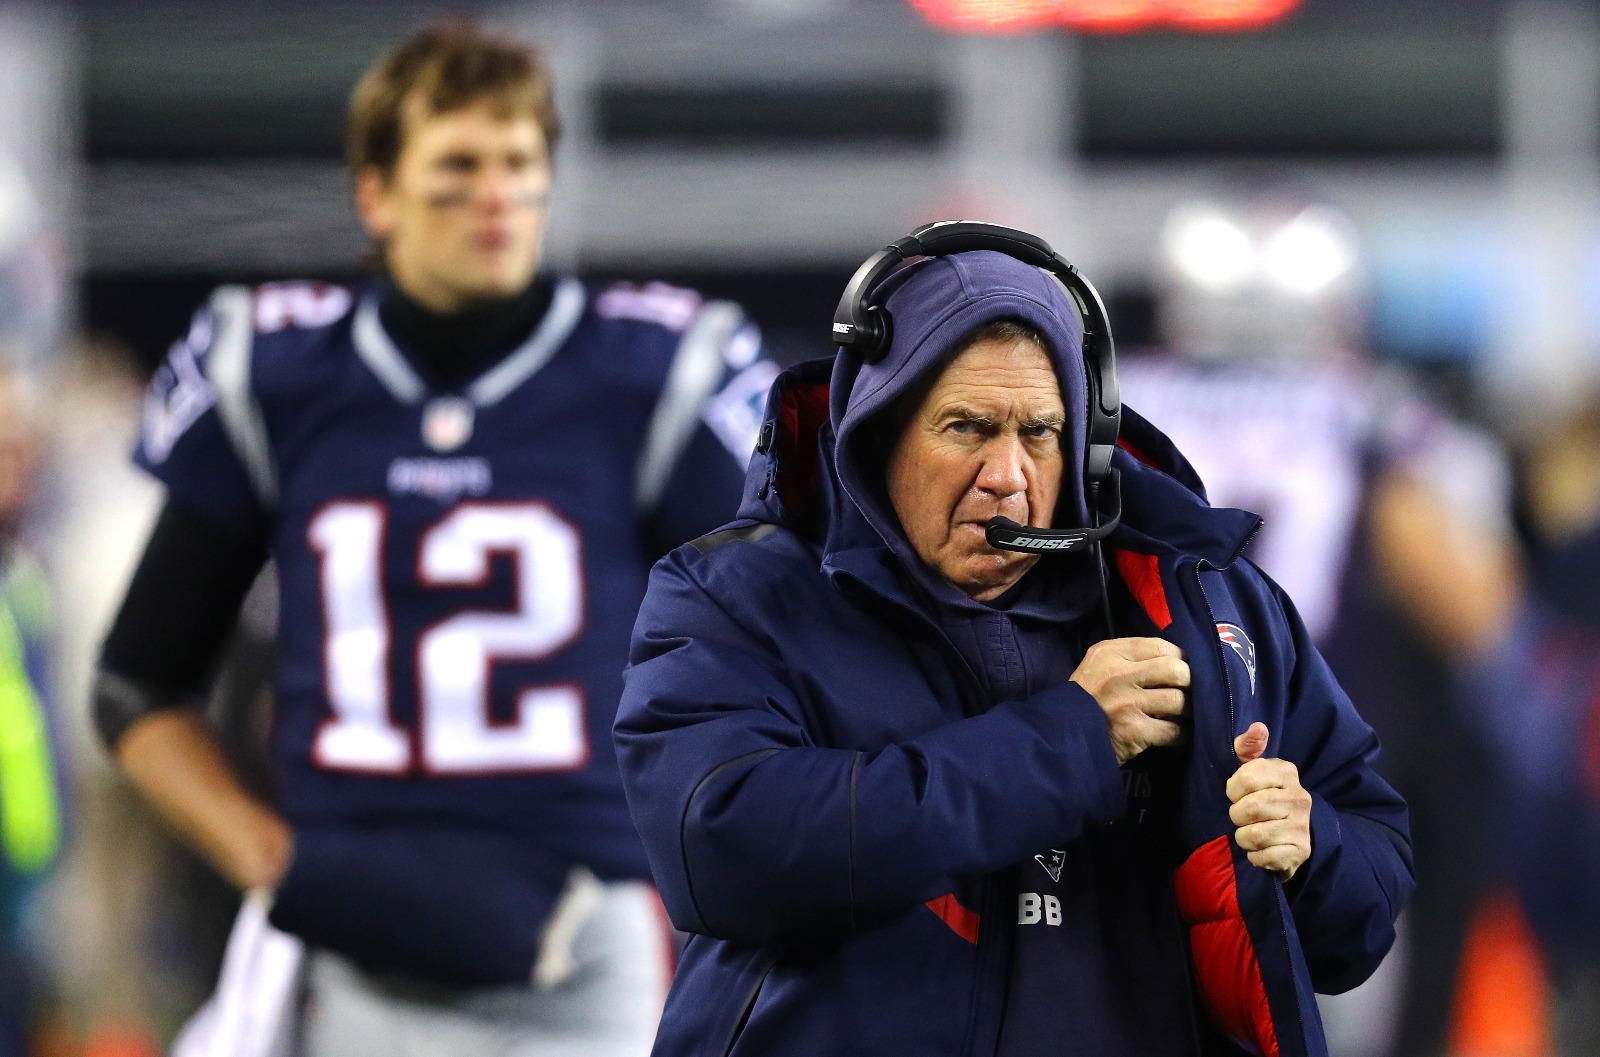 Bill Belichick stole Cam Newton for pennies to replace Tom Brady as the starting quarterback for the New England Patriots.